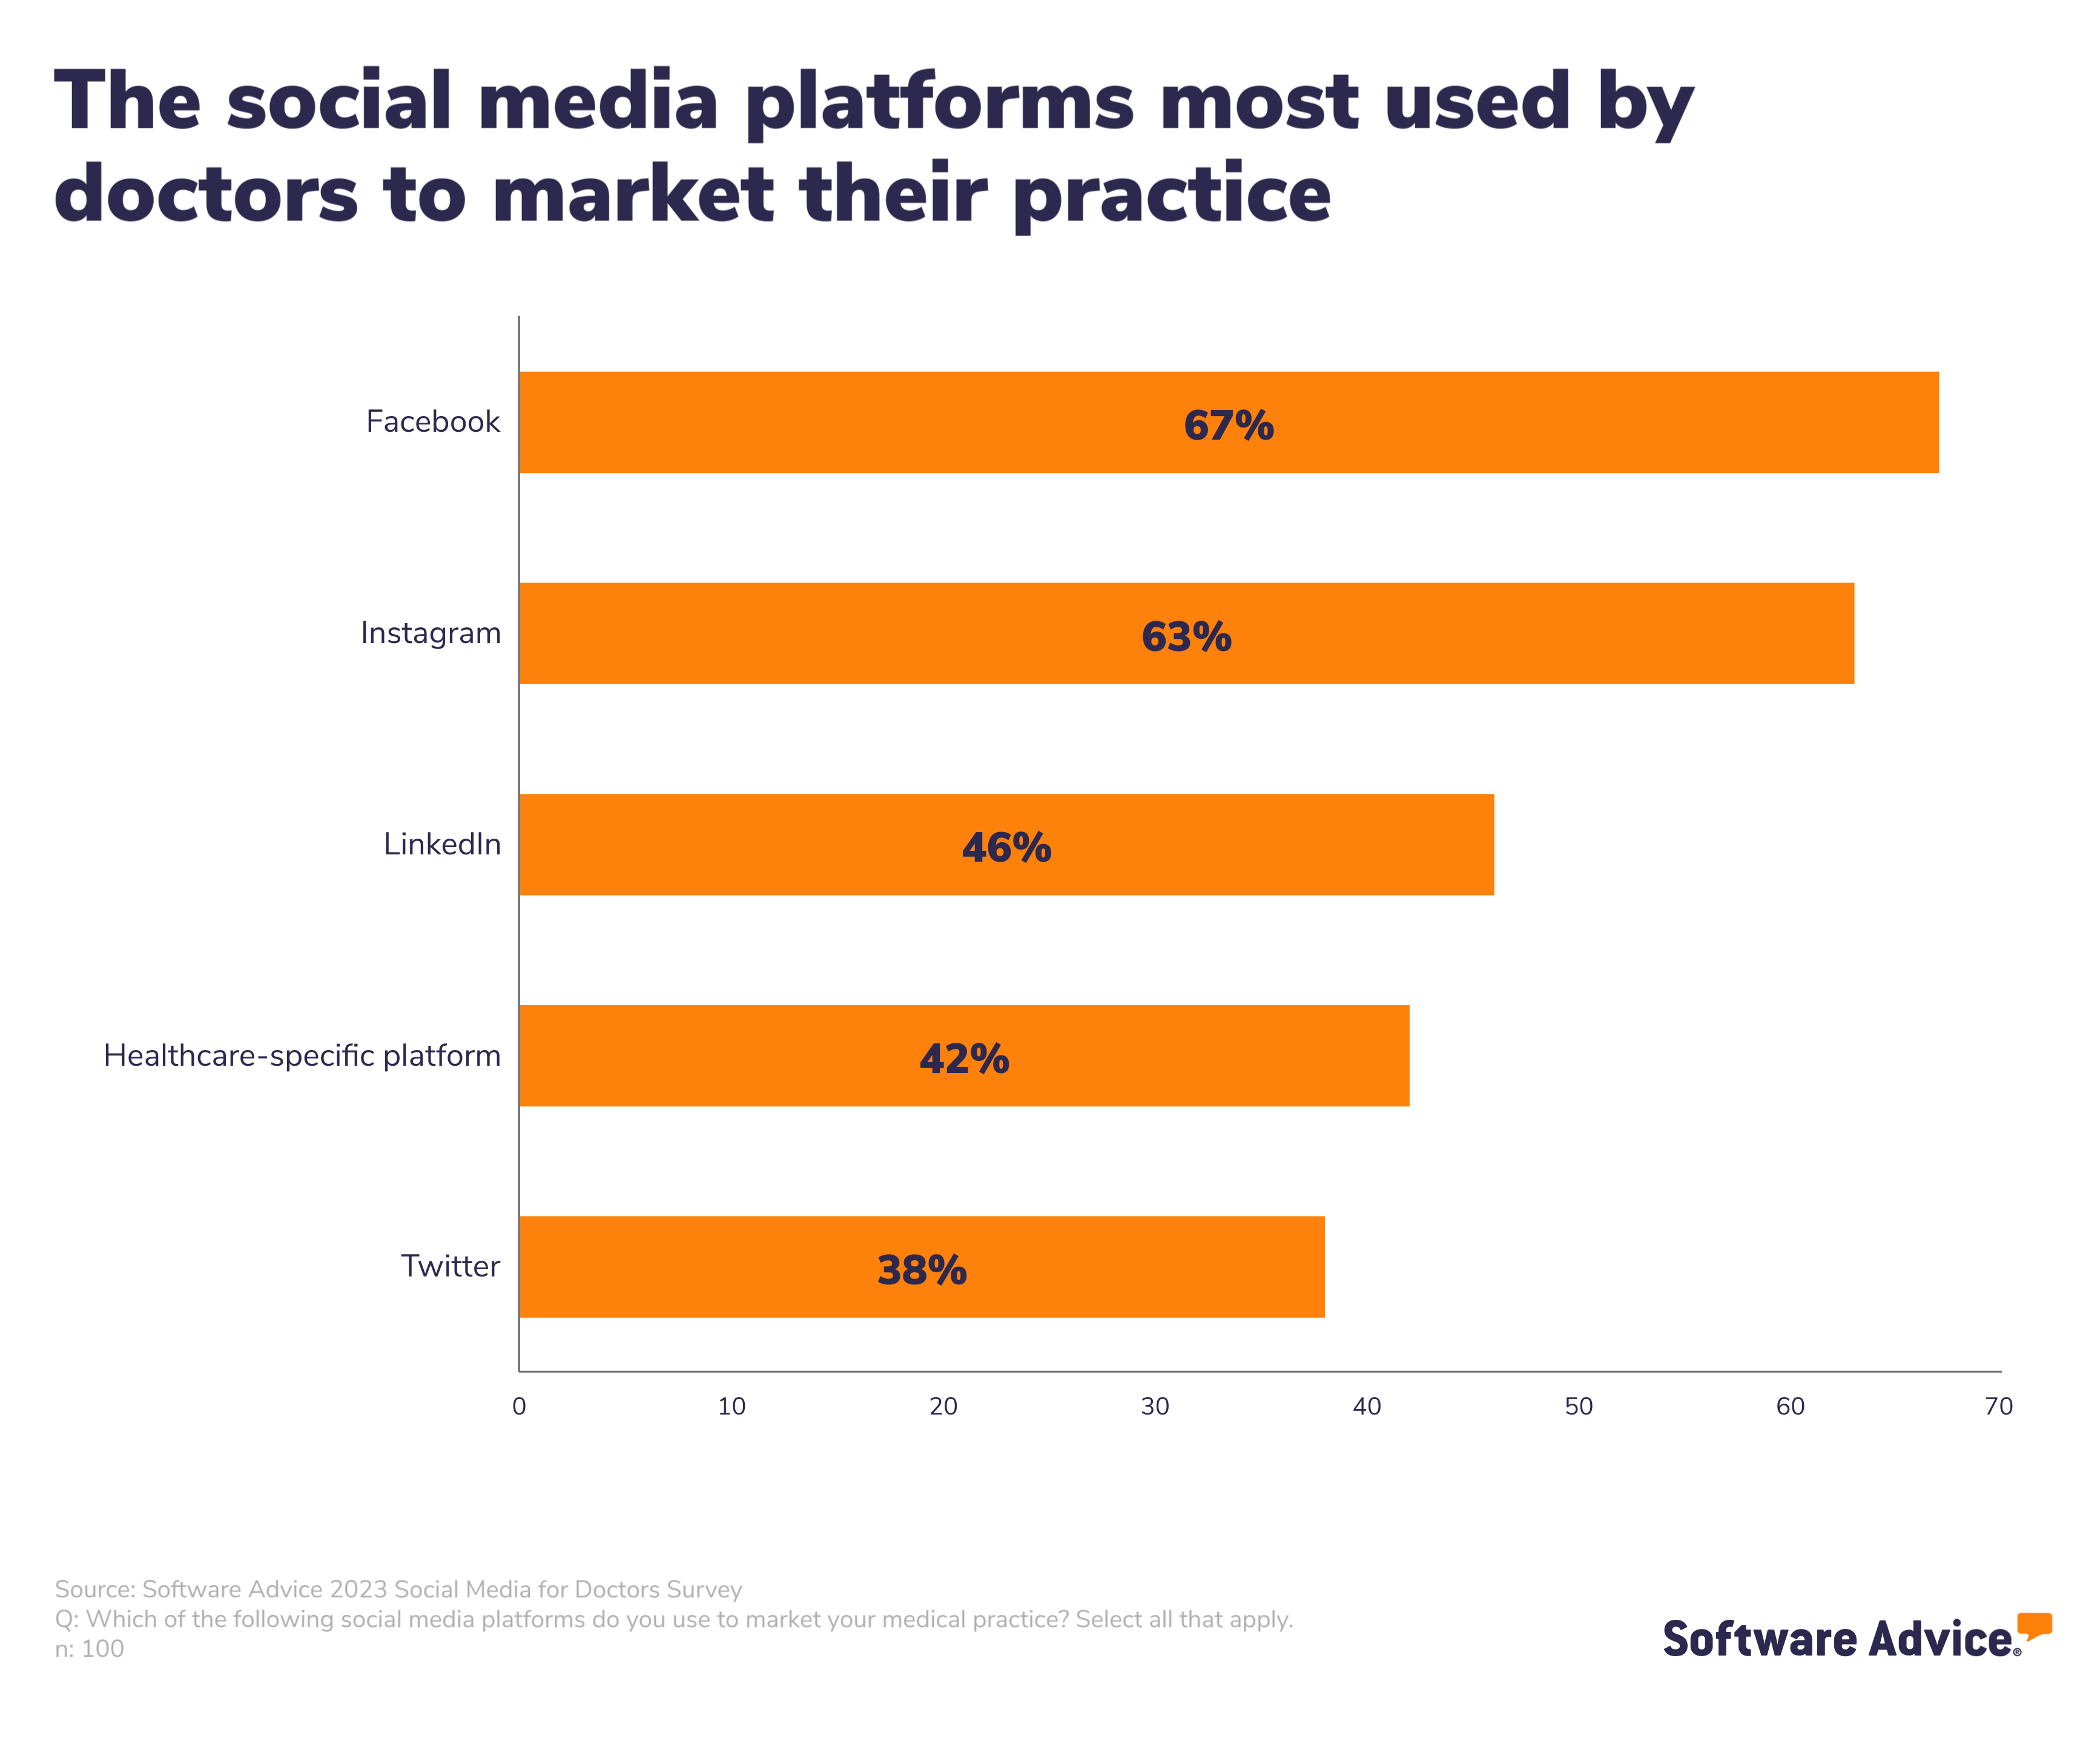 The social media platforms most used by doctors to market their practice